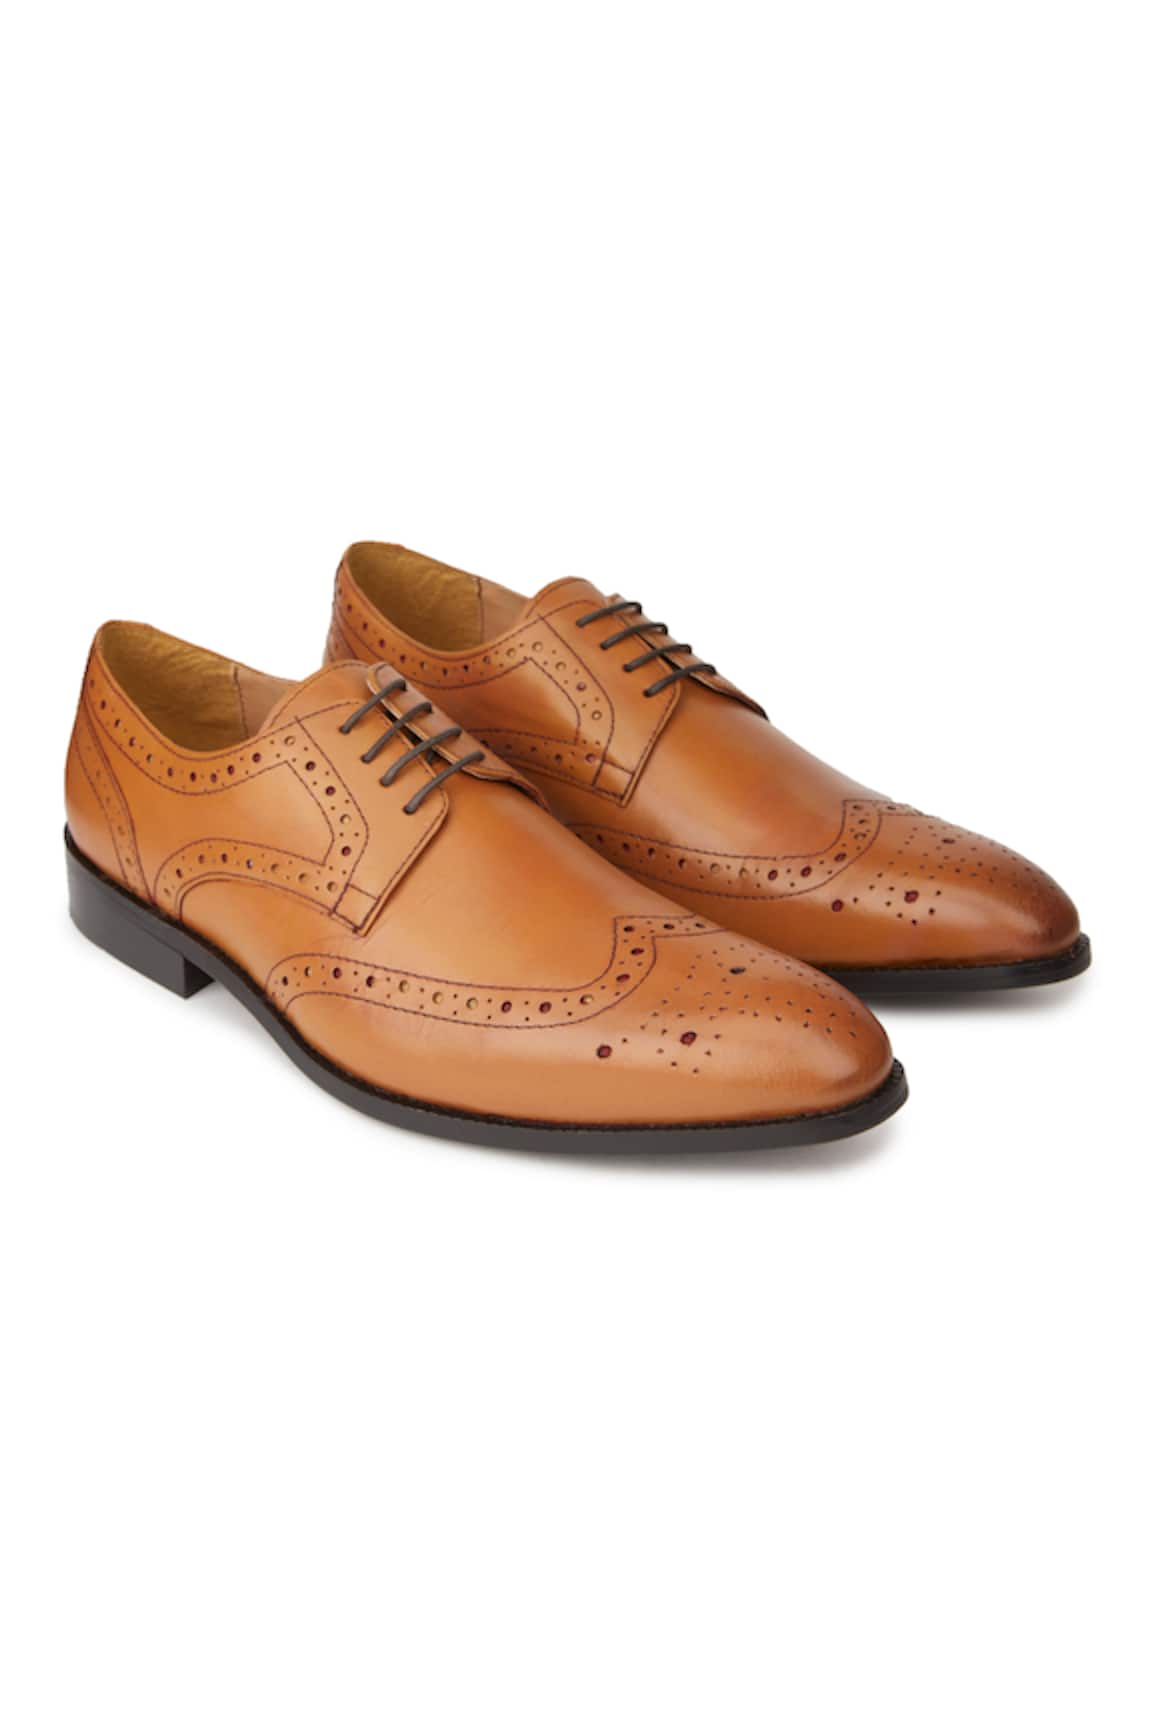 Hats Off Accessories Leather Textured Oxford Shoes